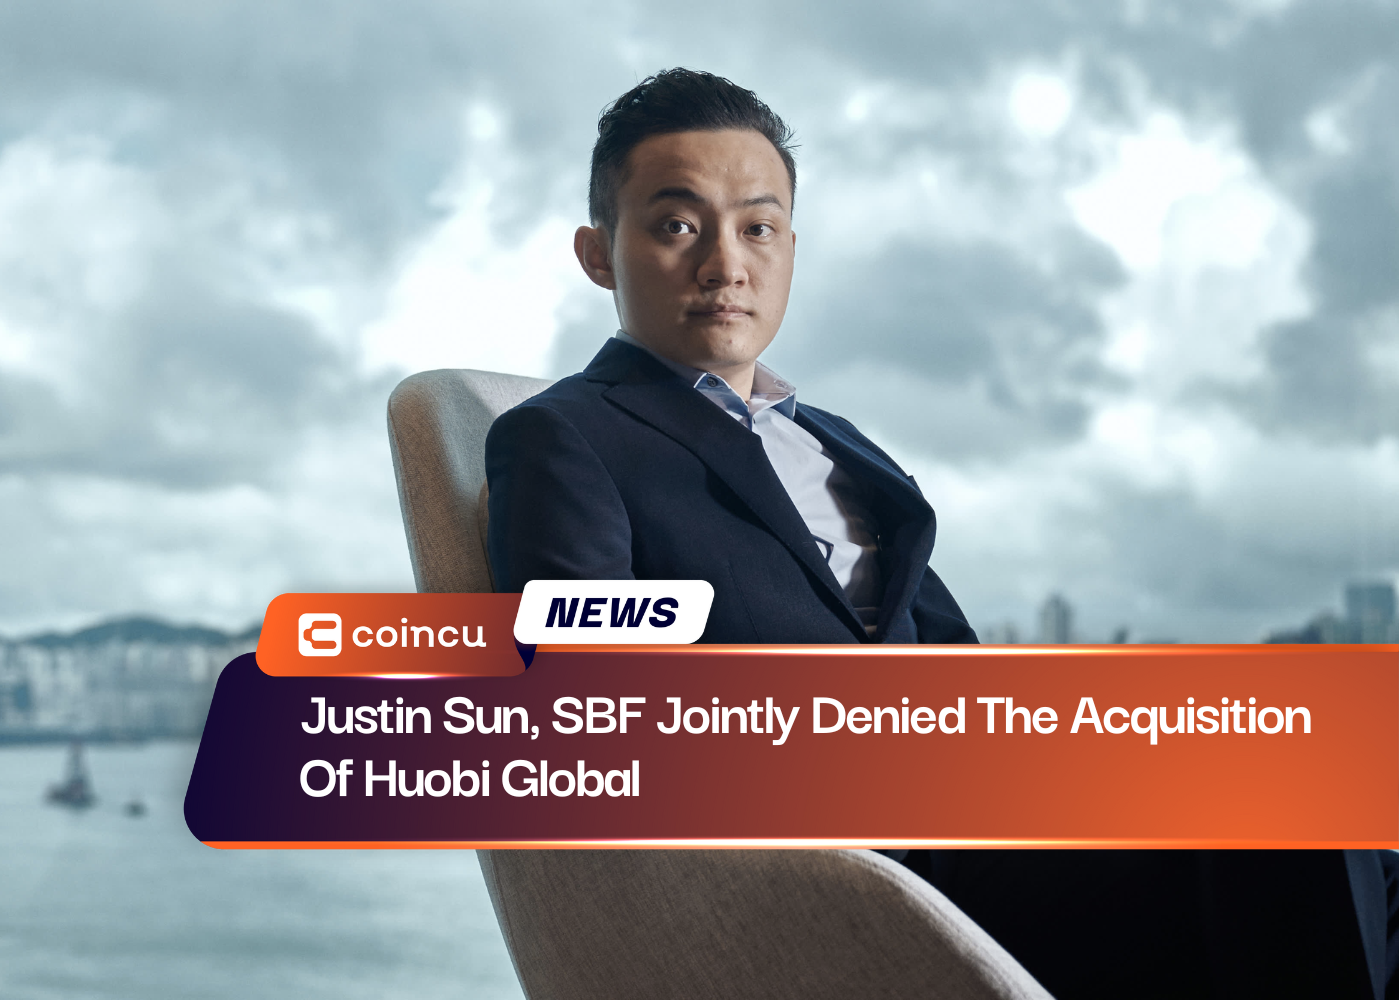 Justin Sun, SBF Jointly Denied The Acquisition Of Huobi Global